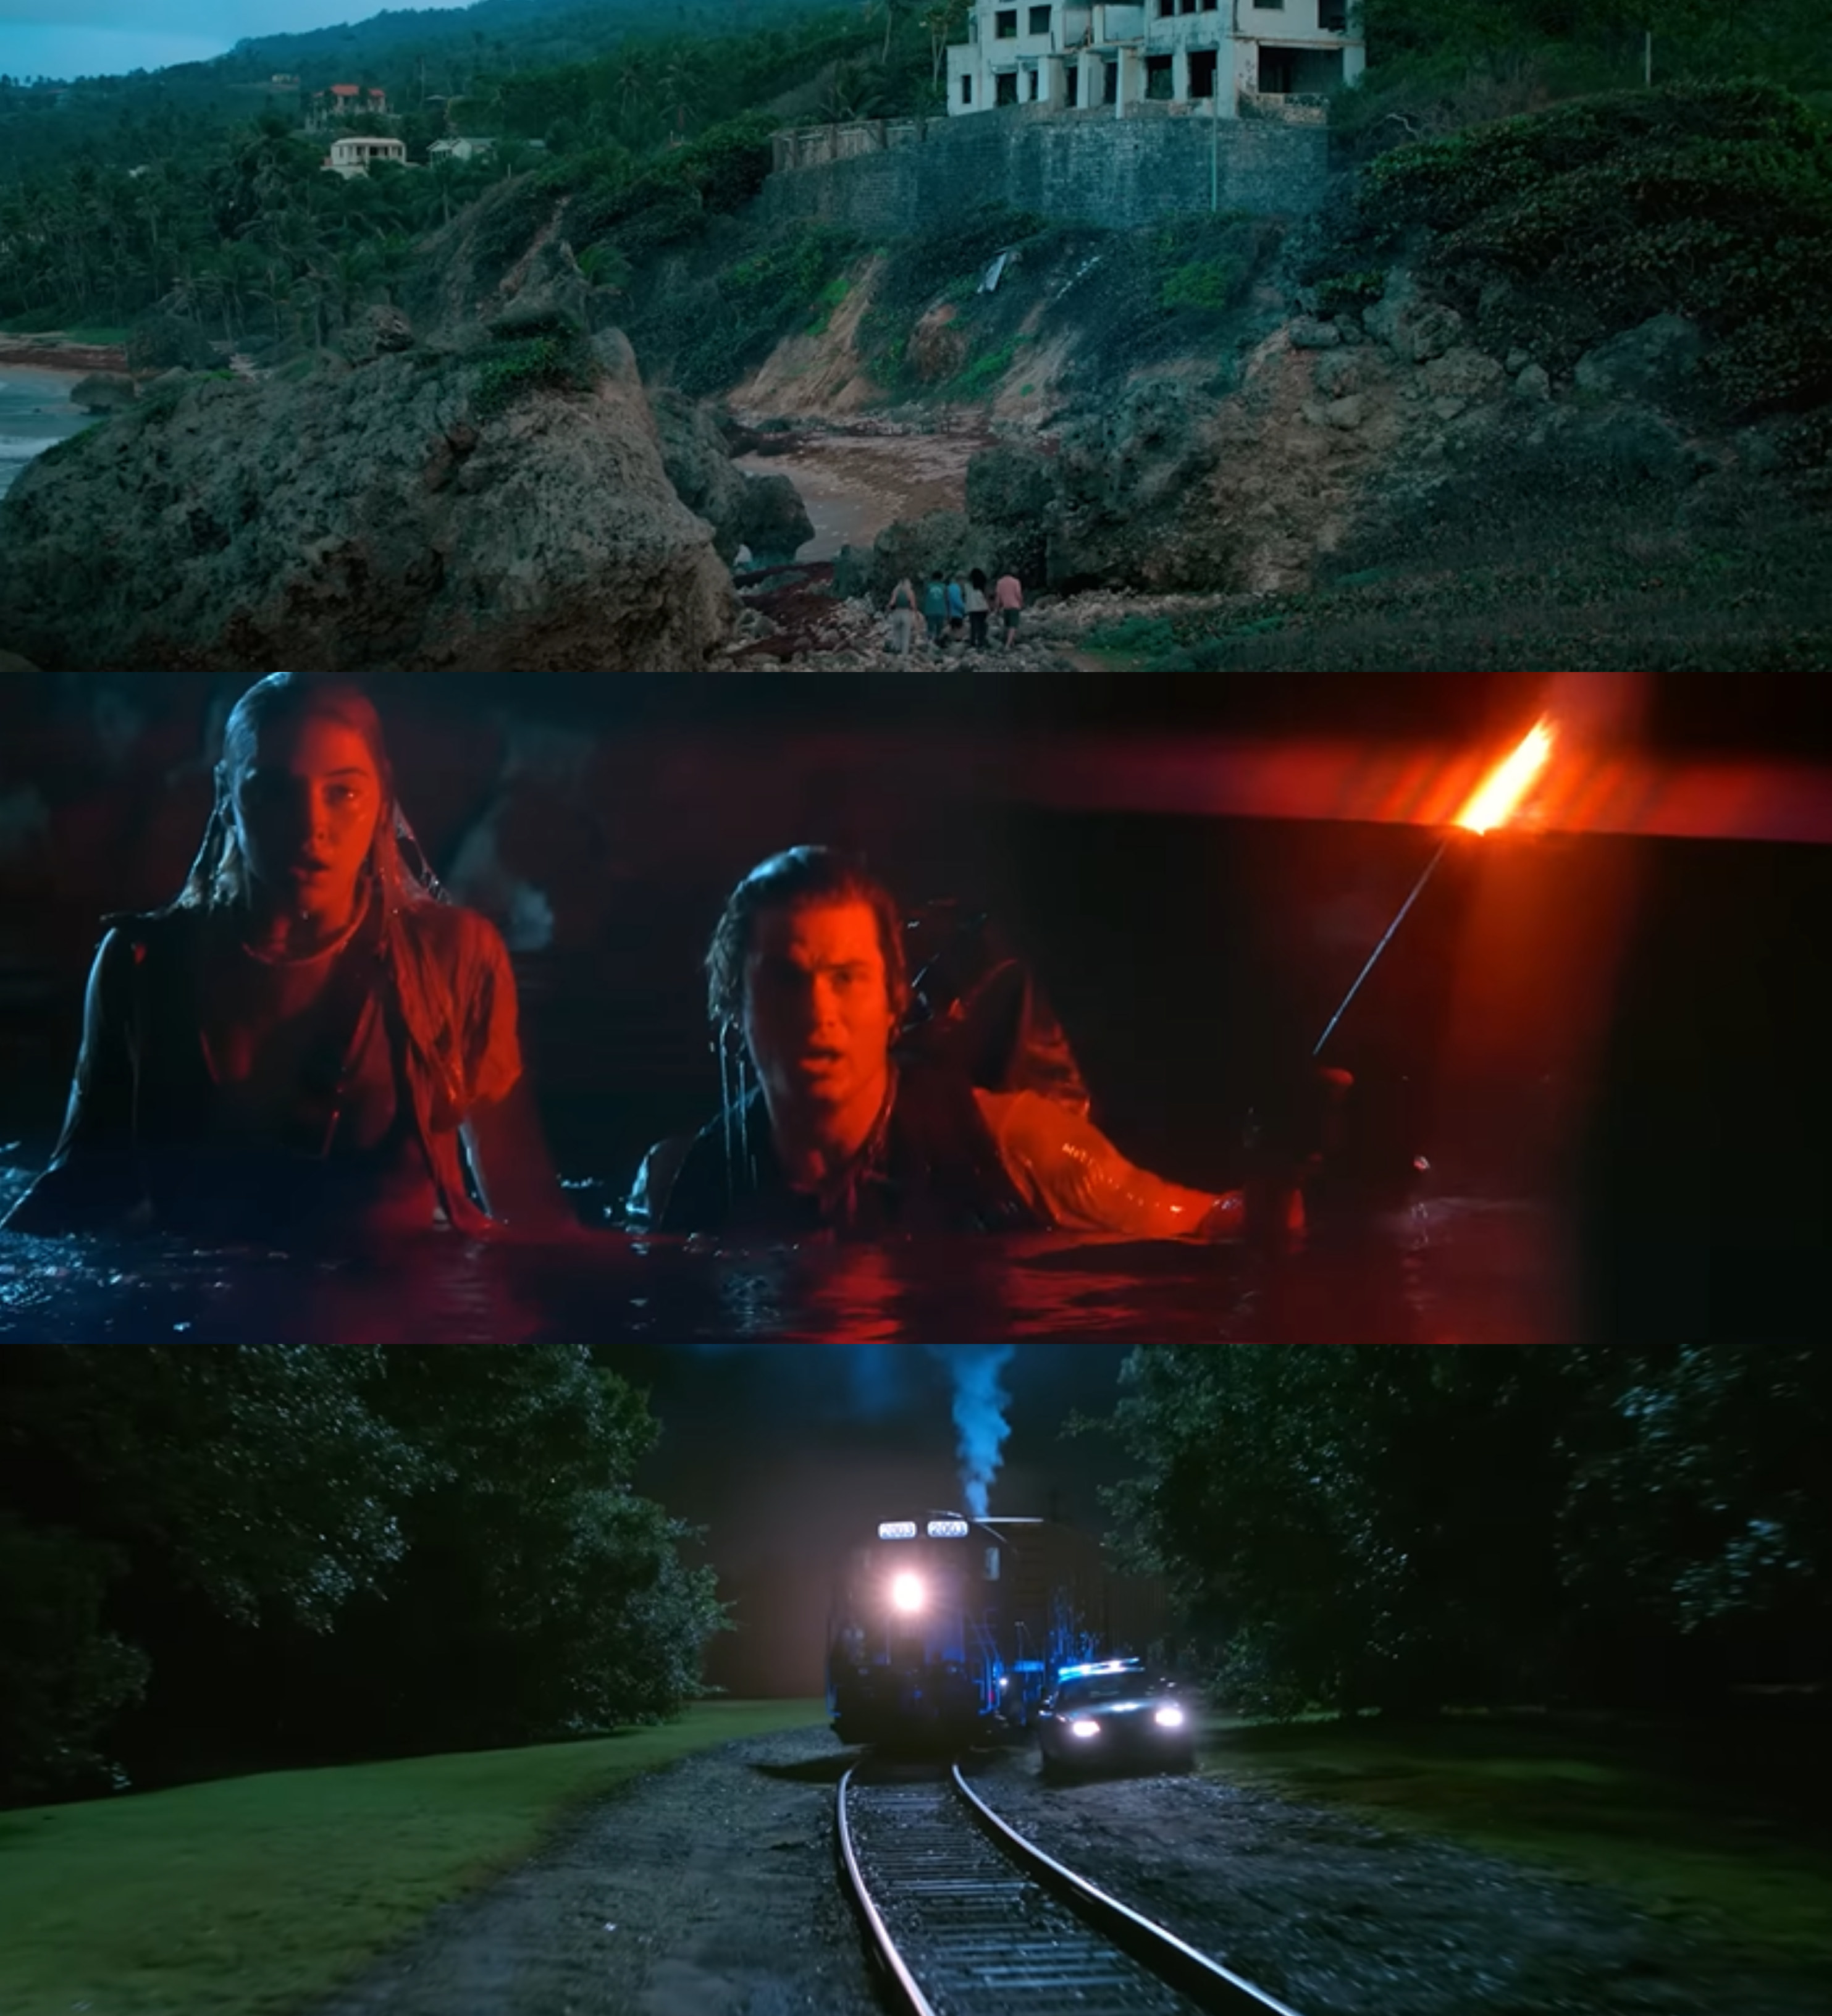 top image, a wide shot of a grand house near the water, middle image, john b and sarah in water with a flare gun and both looking concerned, and bottom image, a car chasing a train